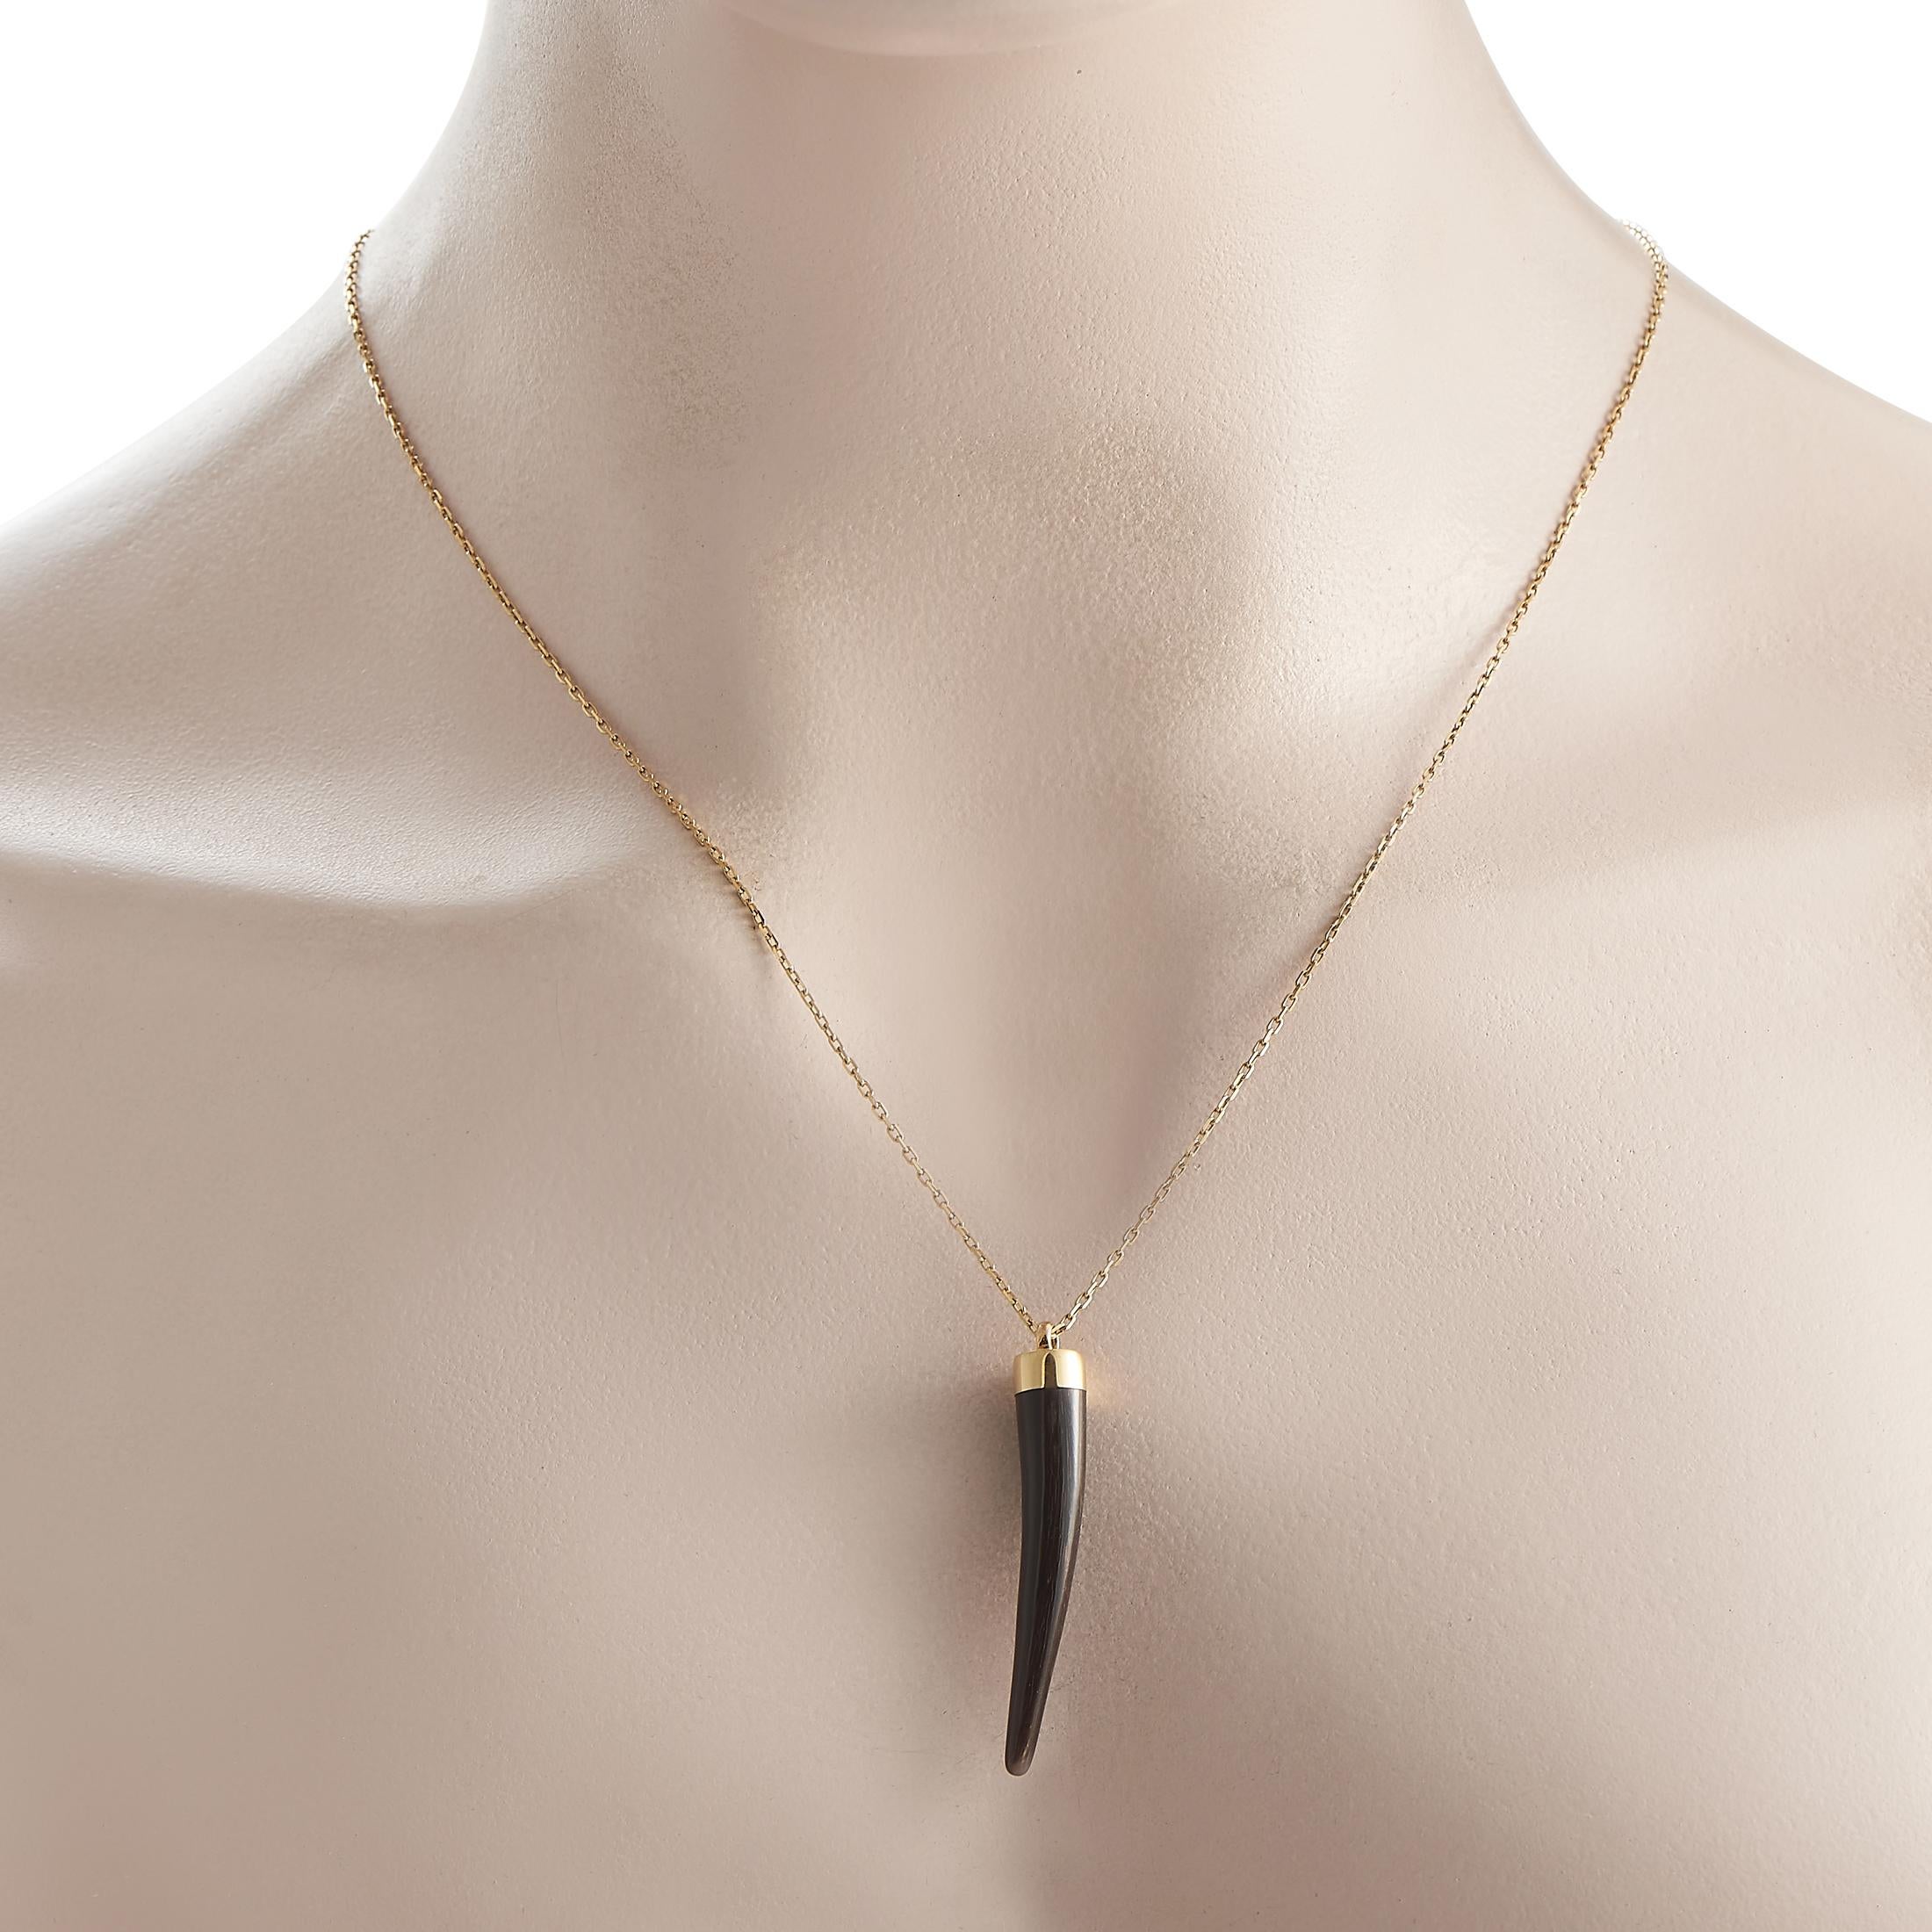 A luxurious yet offbeat luck amulet from the high-fashion Italian house, Gucci. This necklace features a black onyx horn pendant suspending from an 18K yellow gold chain. The pendant measures 1.5 by 0.25 while the necklace chain measures 22 inches